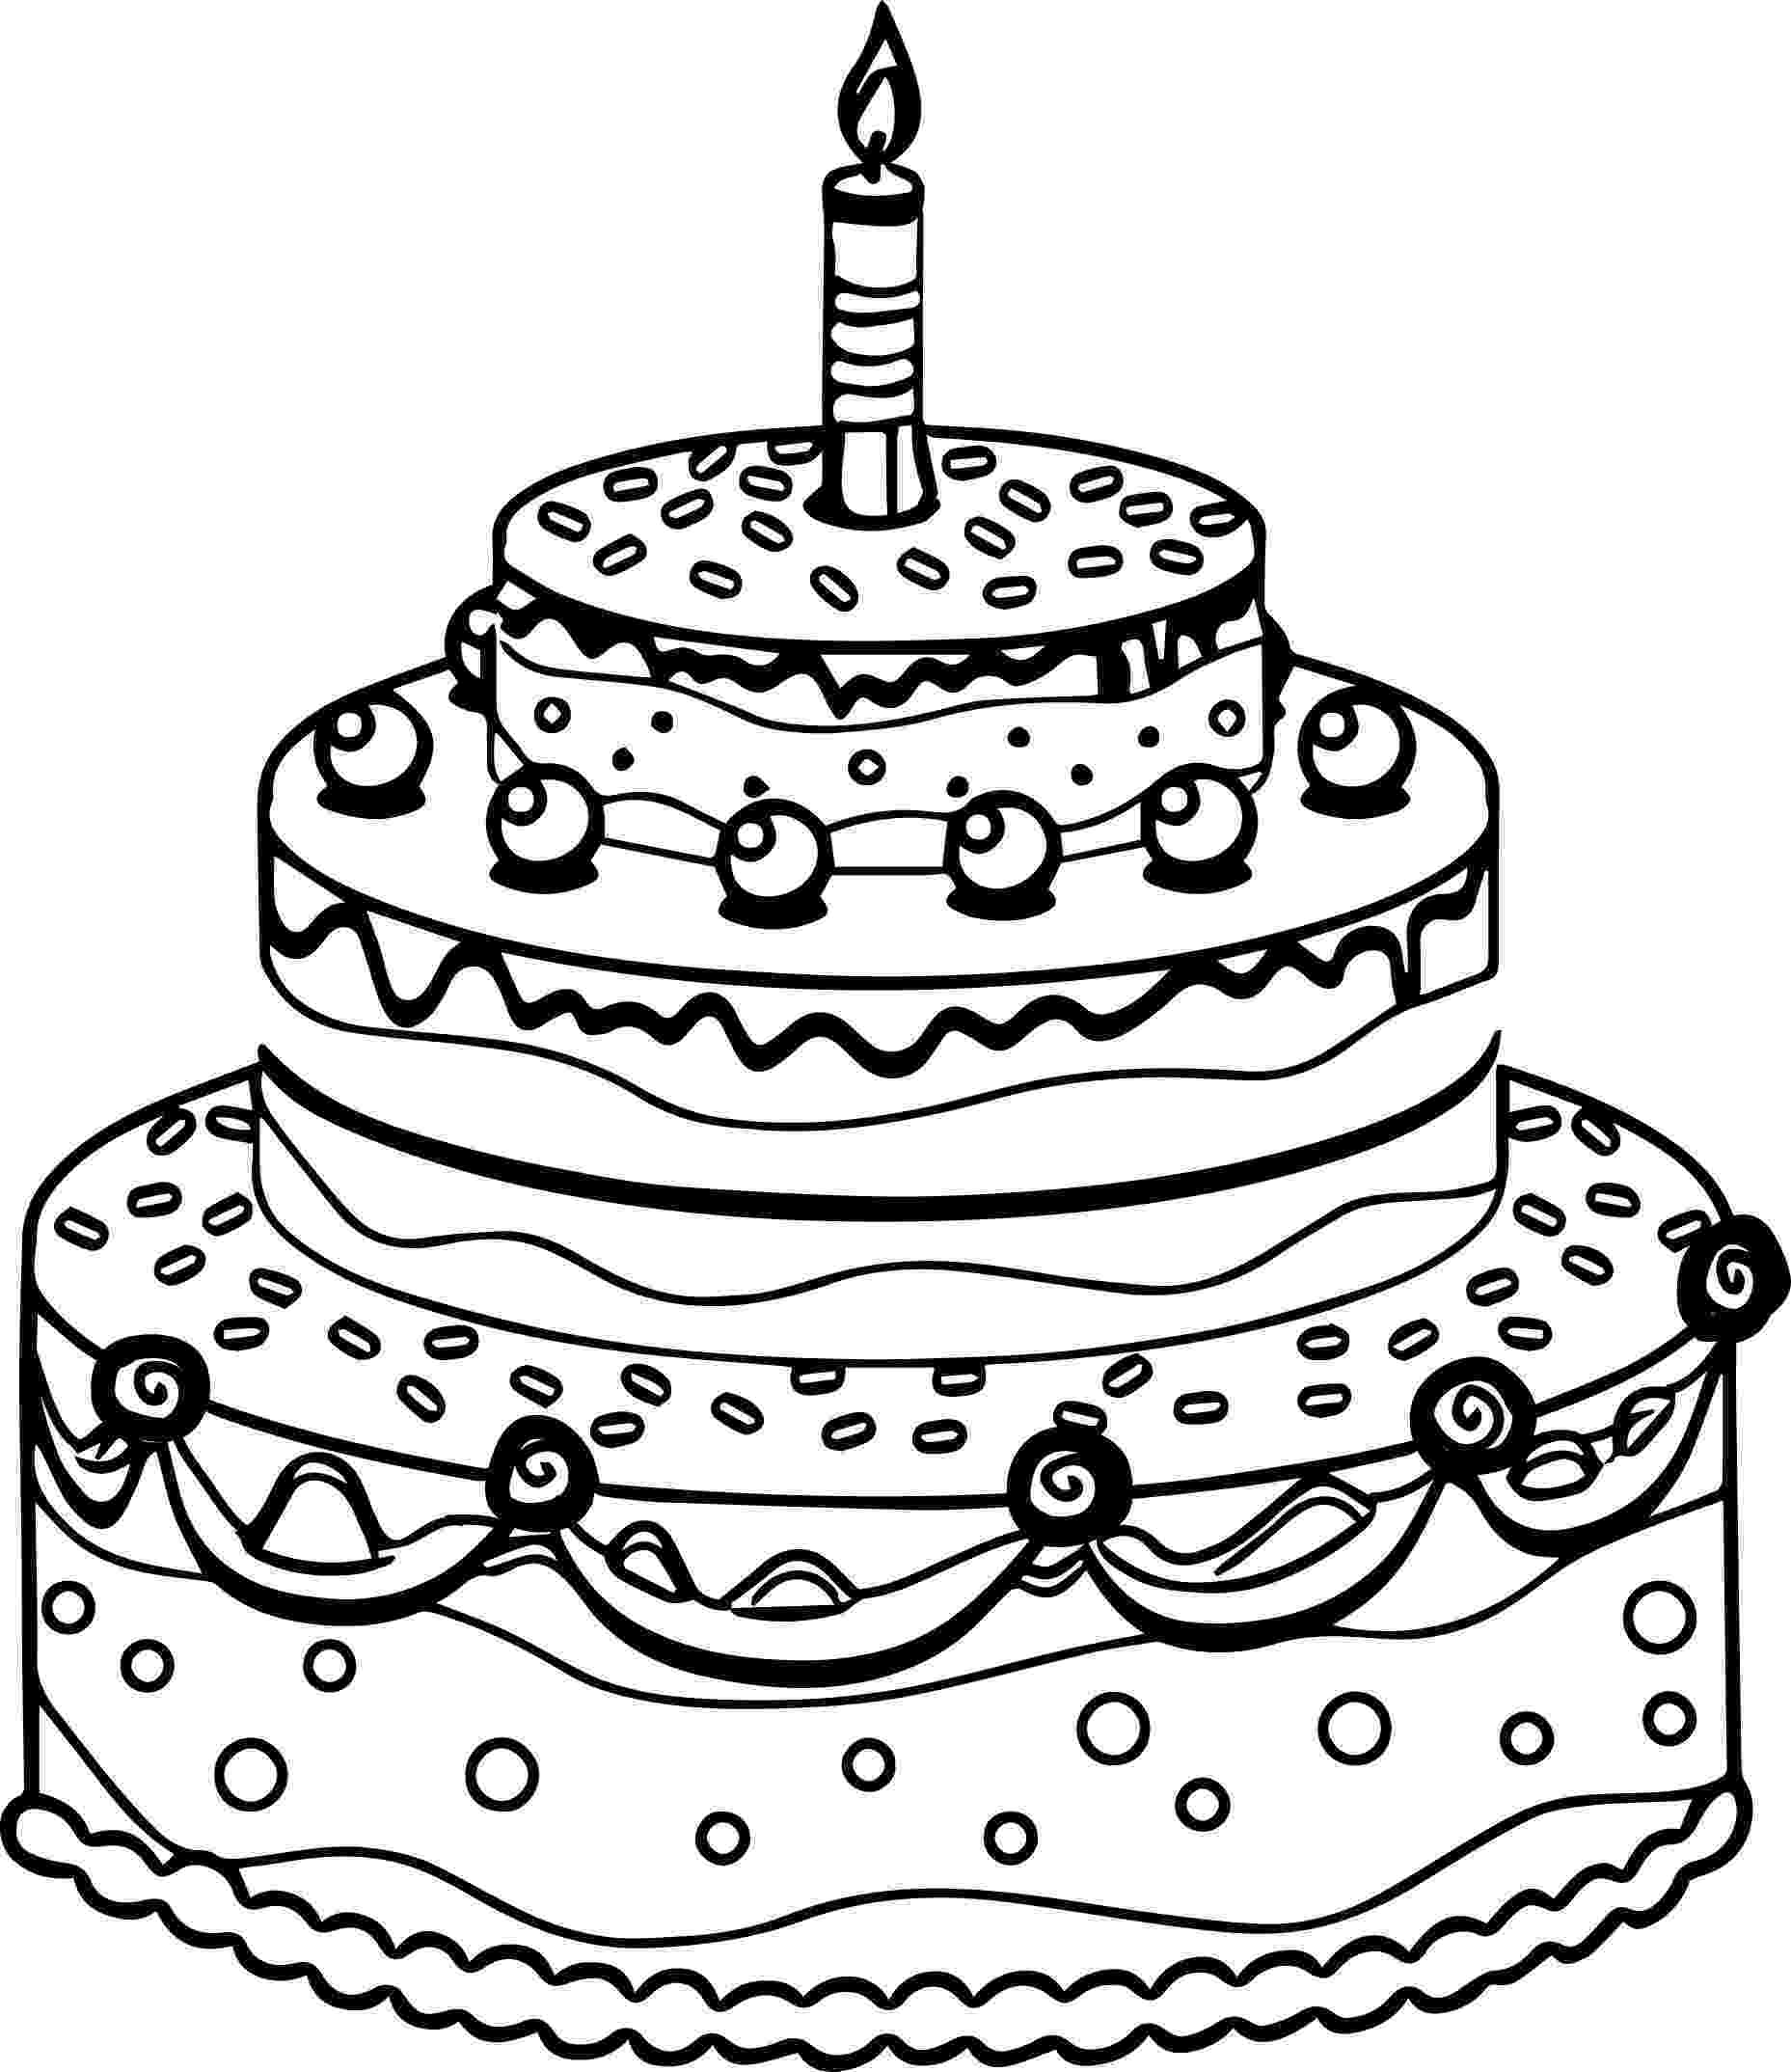 cake coloring page coloring pagesprincess coloring pagesdisney princess page coloring cake 